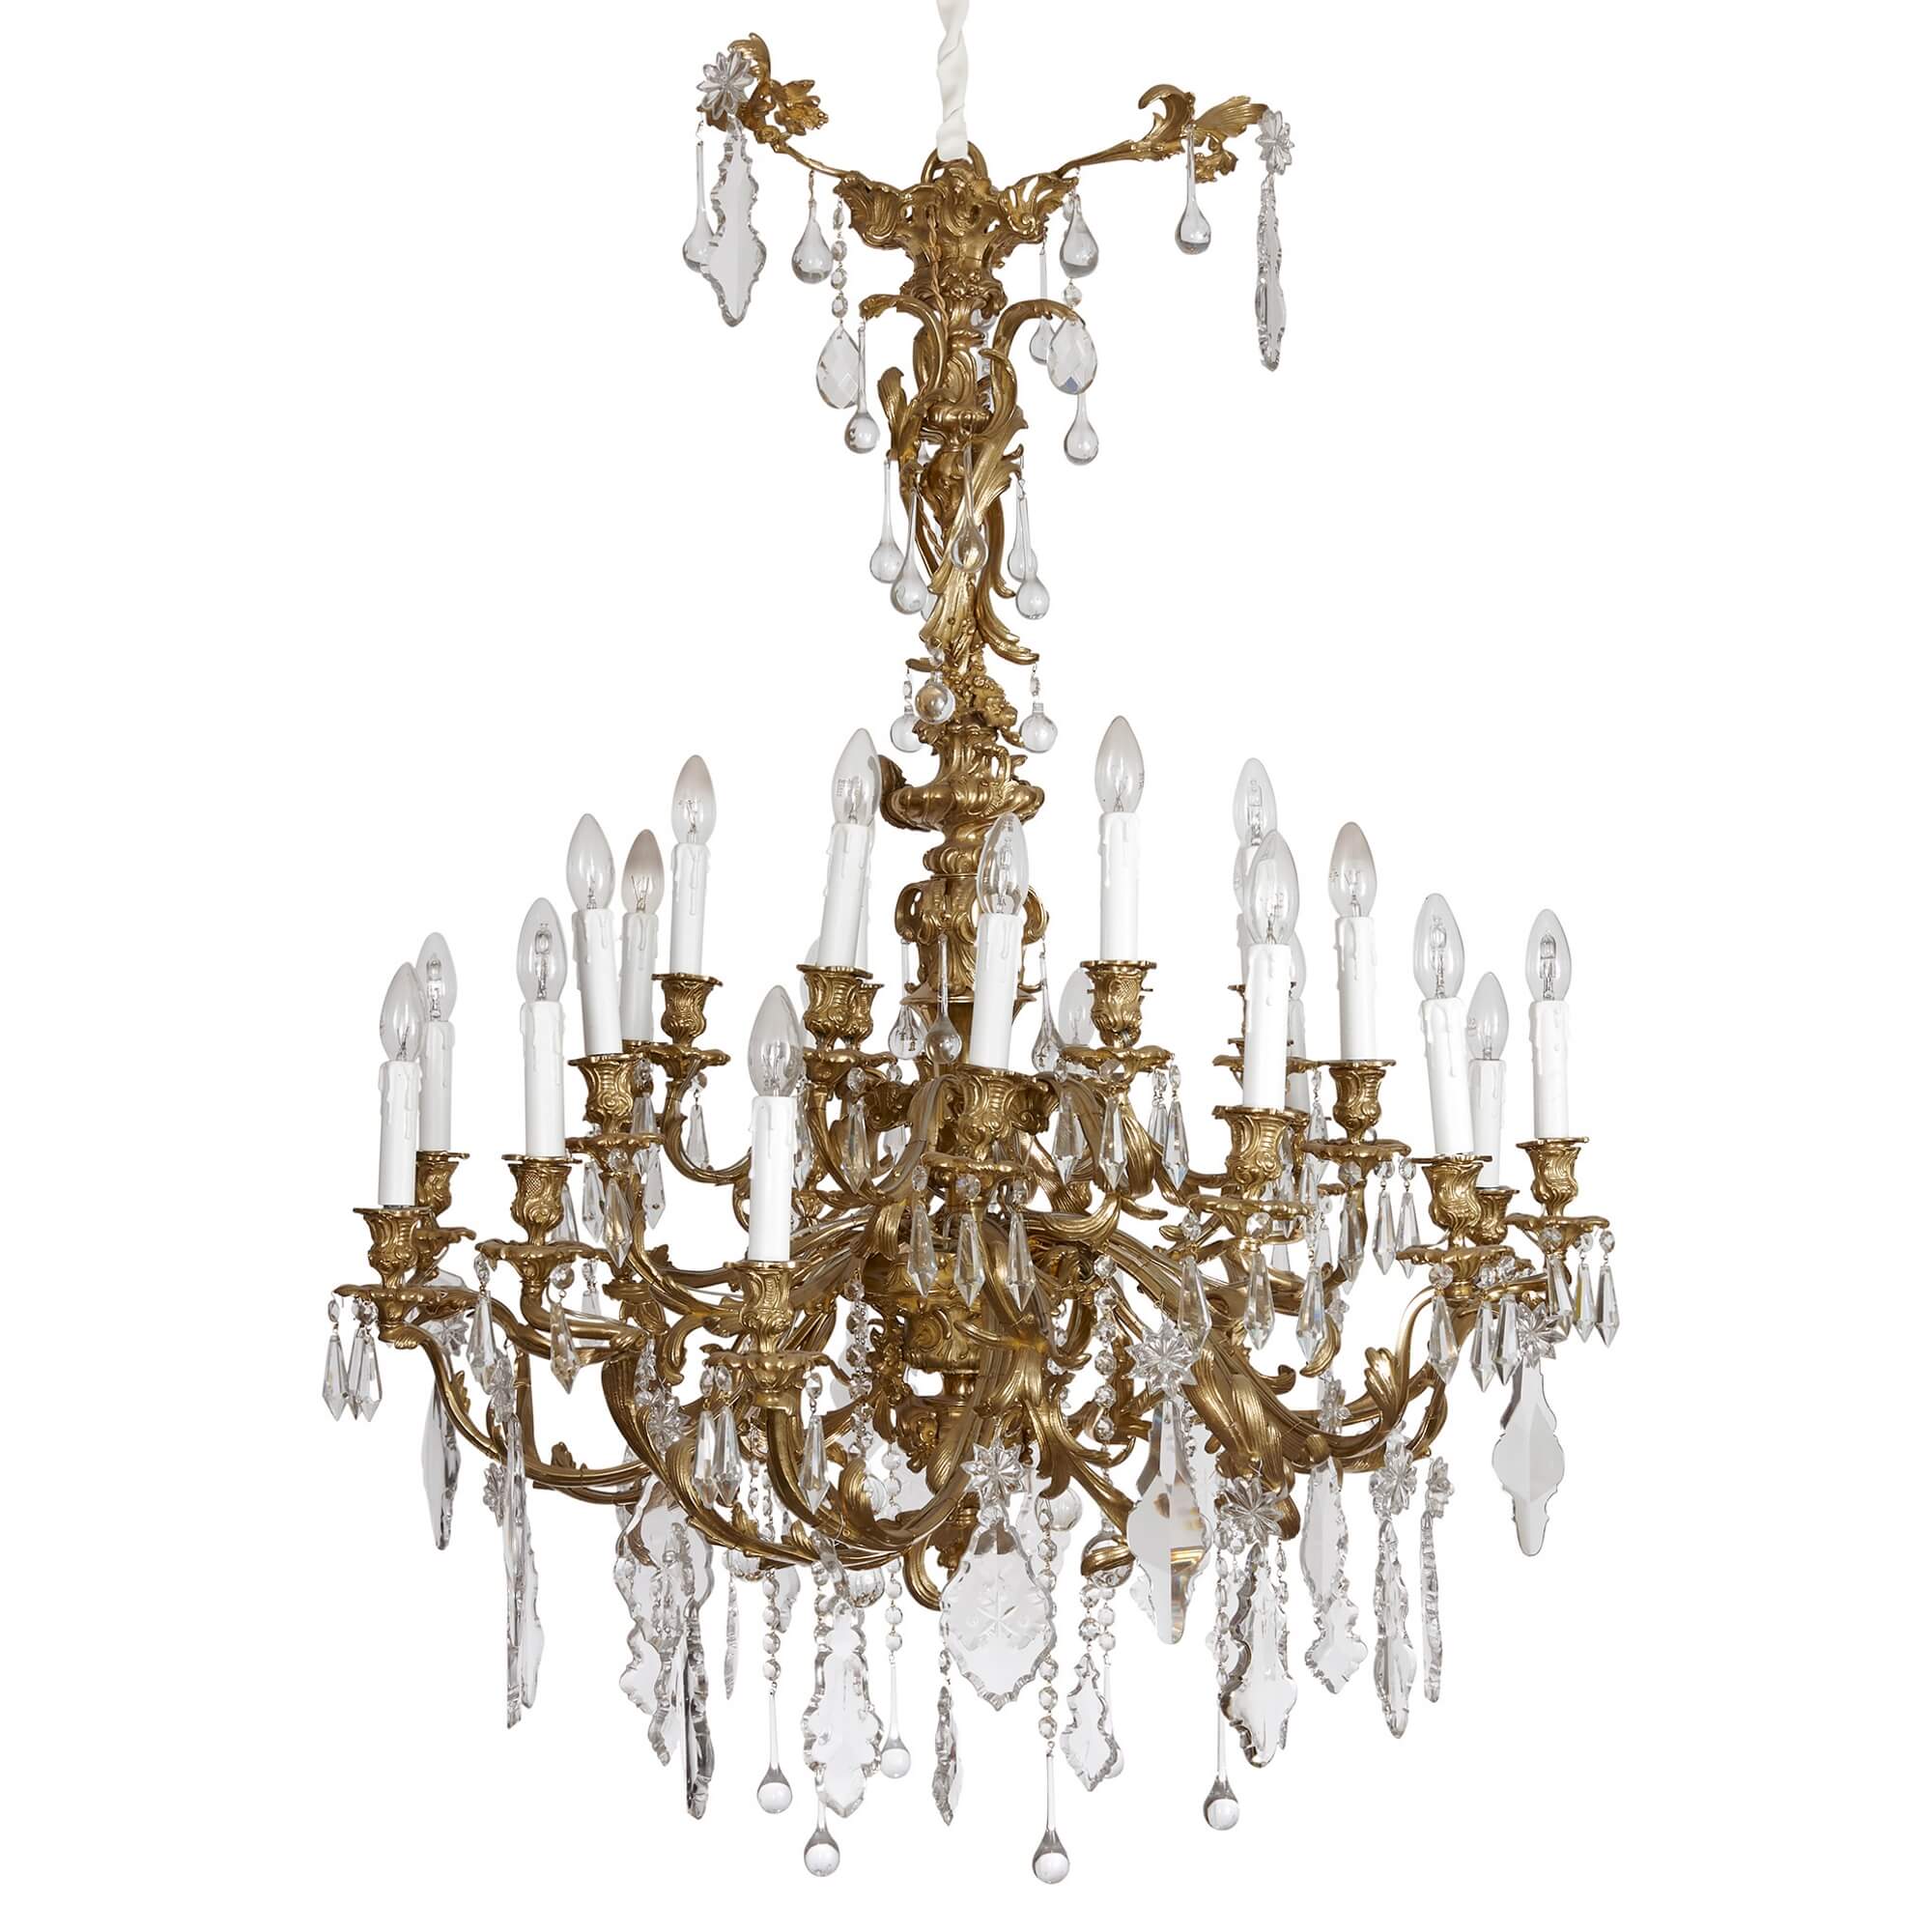 Antique Ormolu and Cut-Glass Rococo-Style Chandelier  For Sale